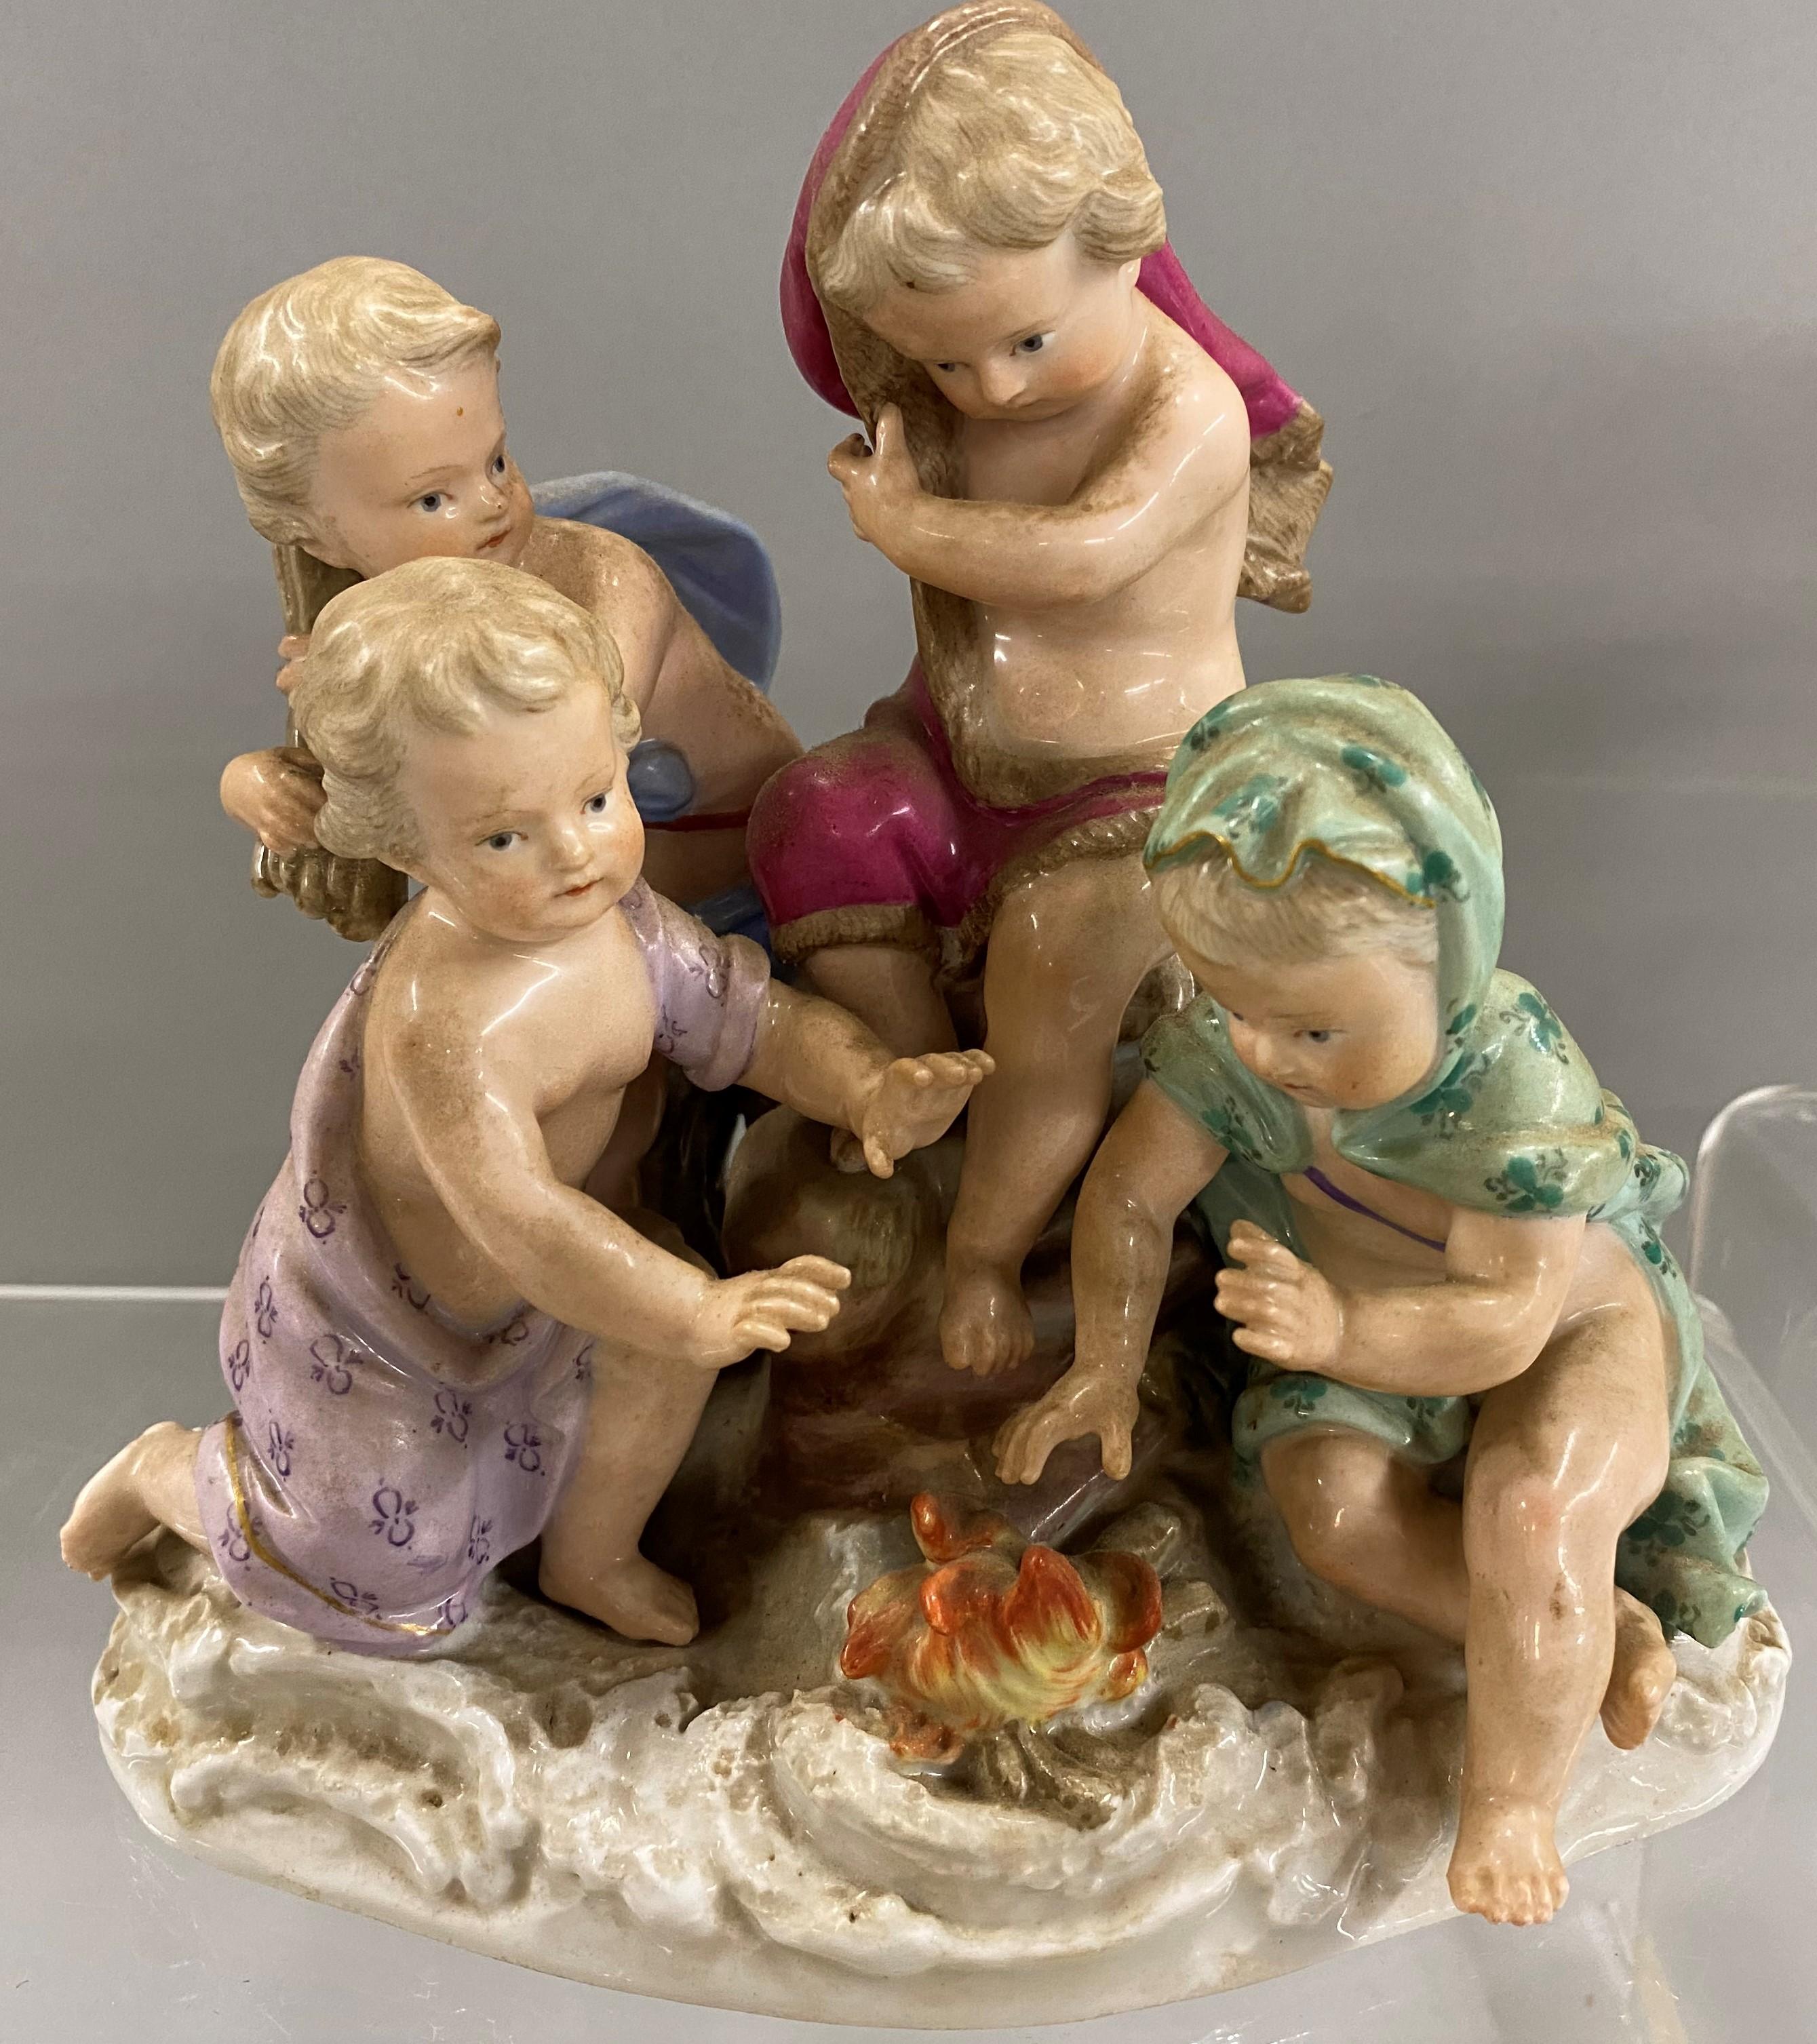 An exceptional set of four groups of four polychrome porcelain cherub figurines depicting the four seasons - spring, summer, fall, and winter, originally designed in 1757 by Johann Joachim Kaendler (1706-1775), one of the top designers for Meissen.